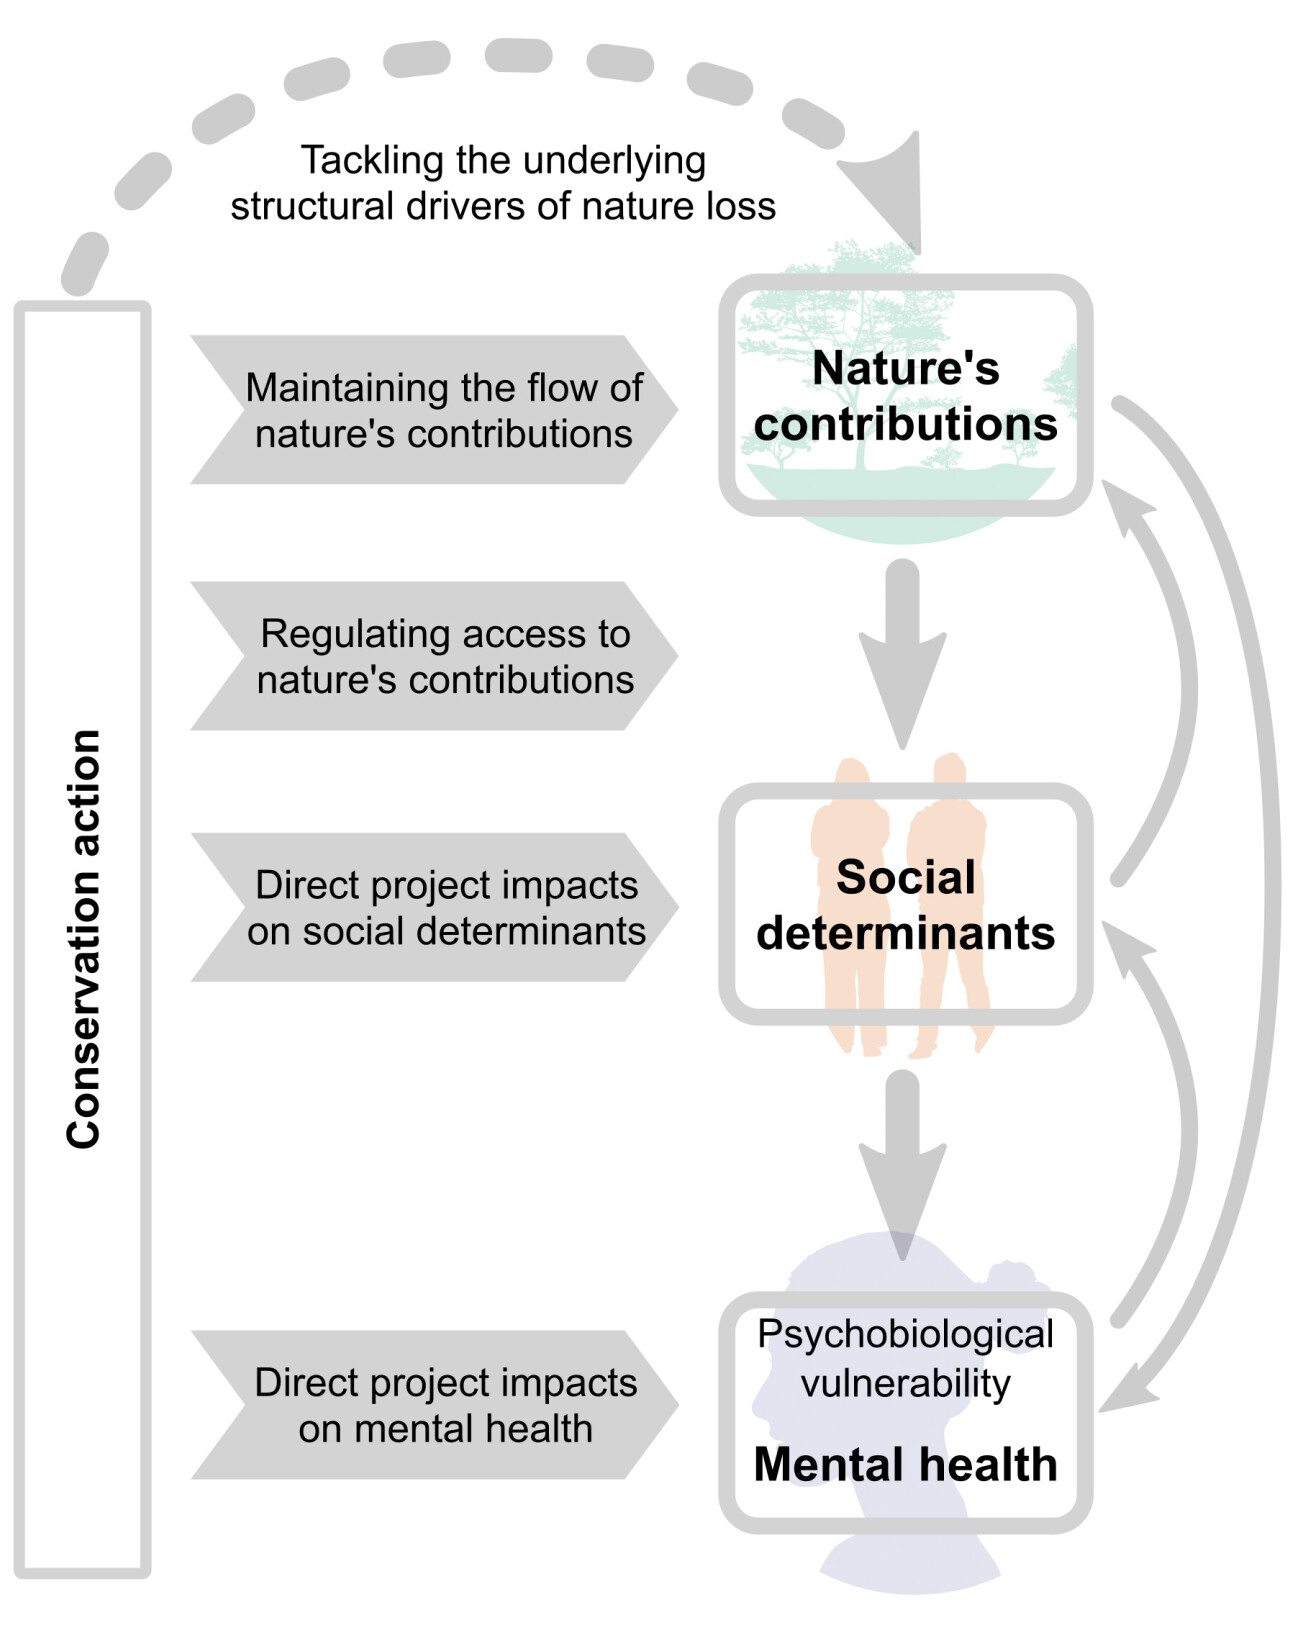 A flow chart showing how conservation action impacts natural resources, and social determinants of mental health.